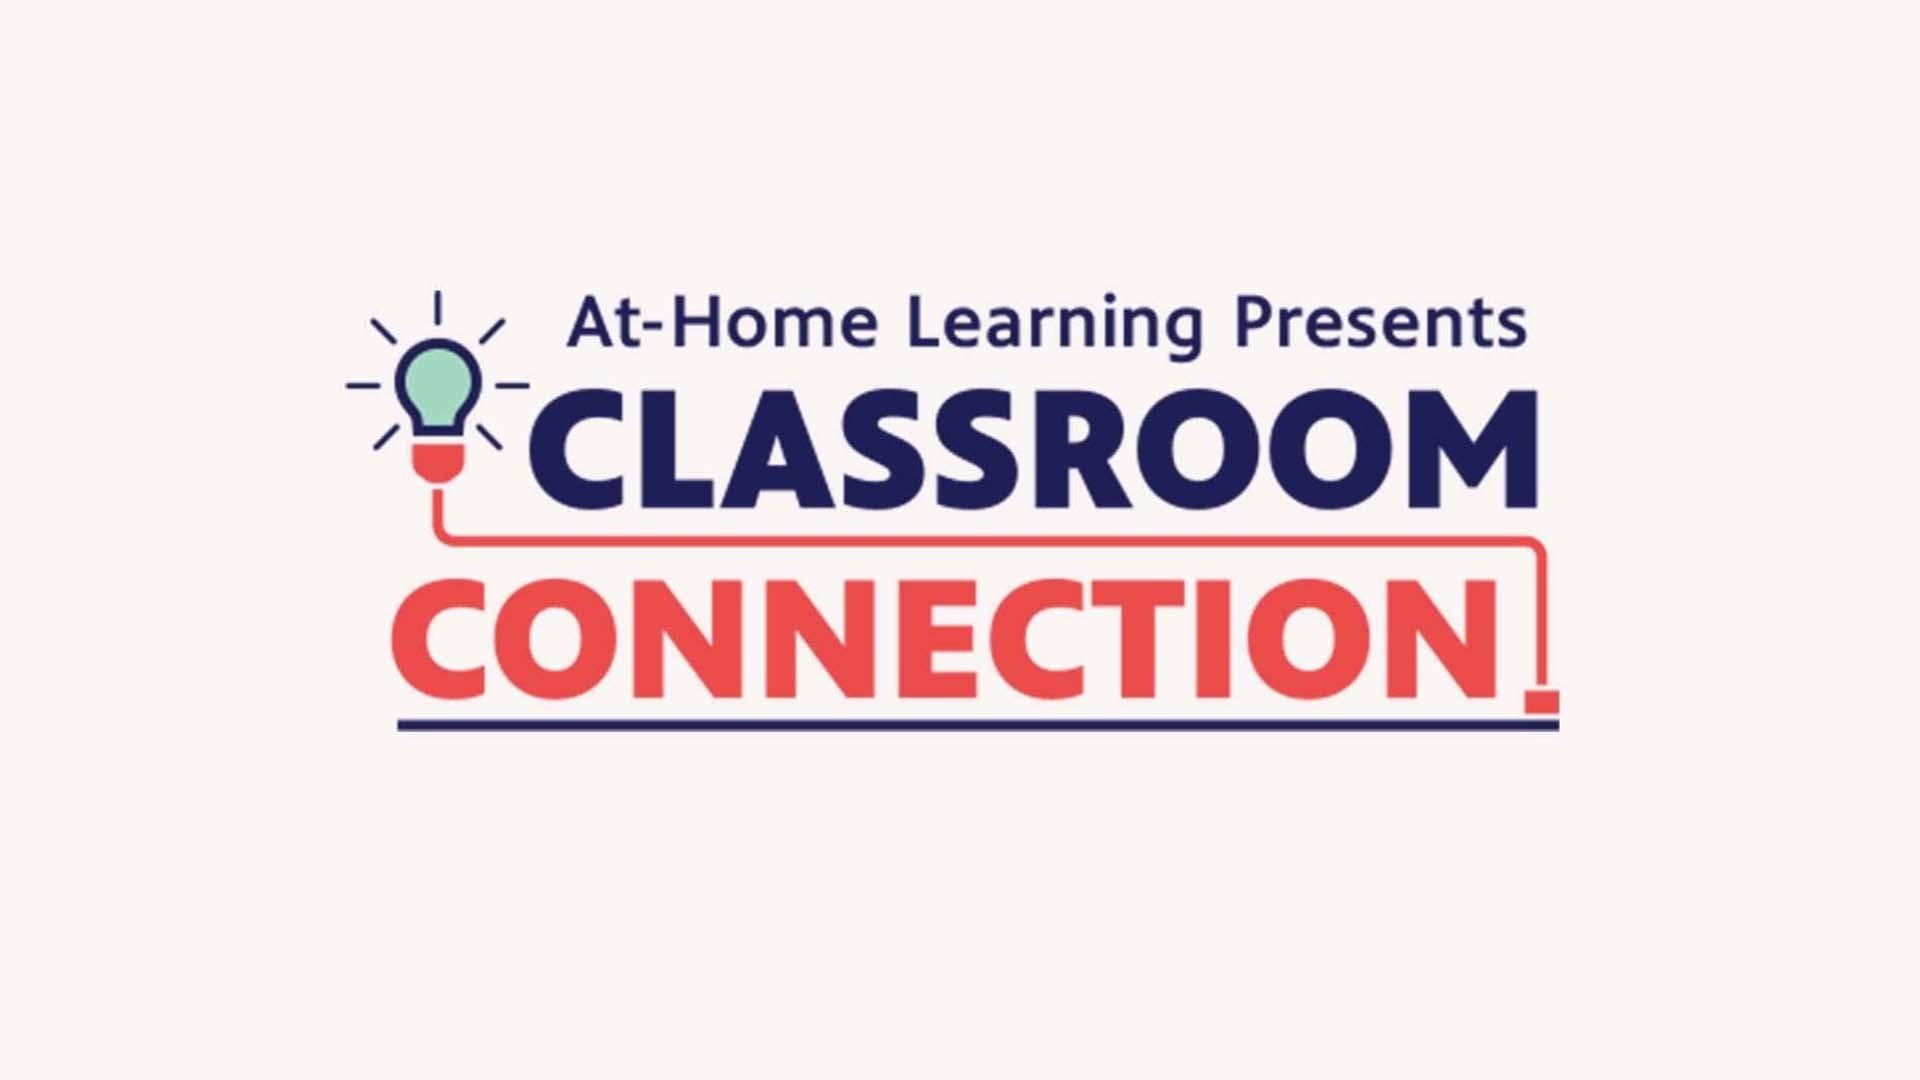 At-Home Learning Presents Classroom Connection